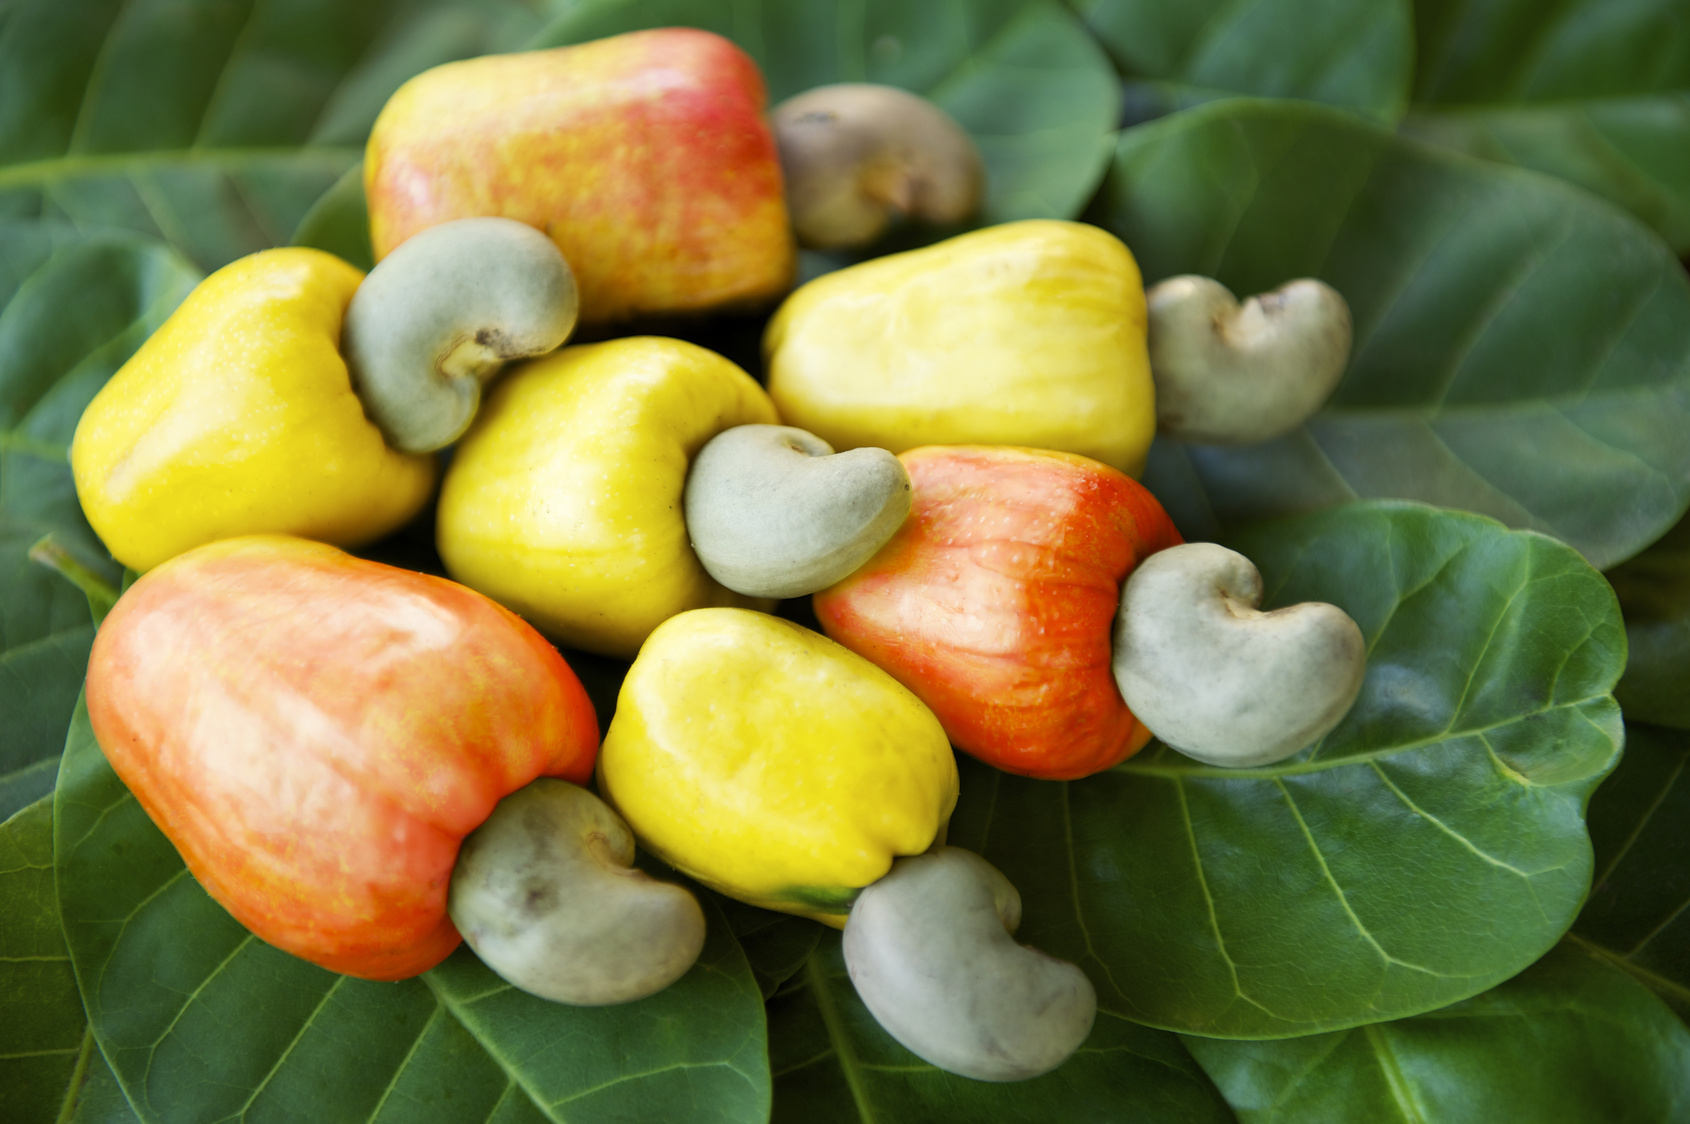 Cashew wallpapers, Food, HQ Cashew pictures | 4K ...